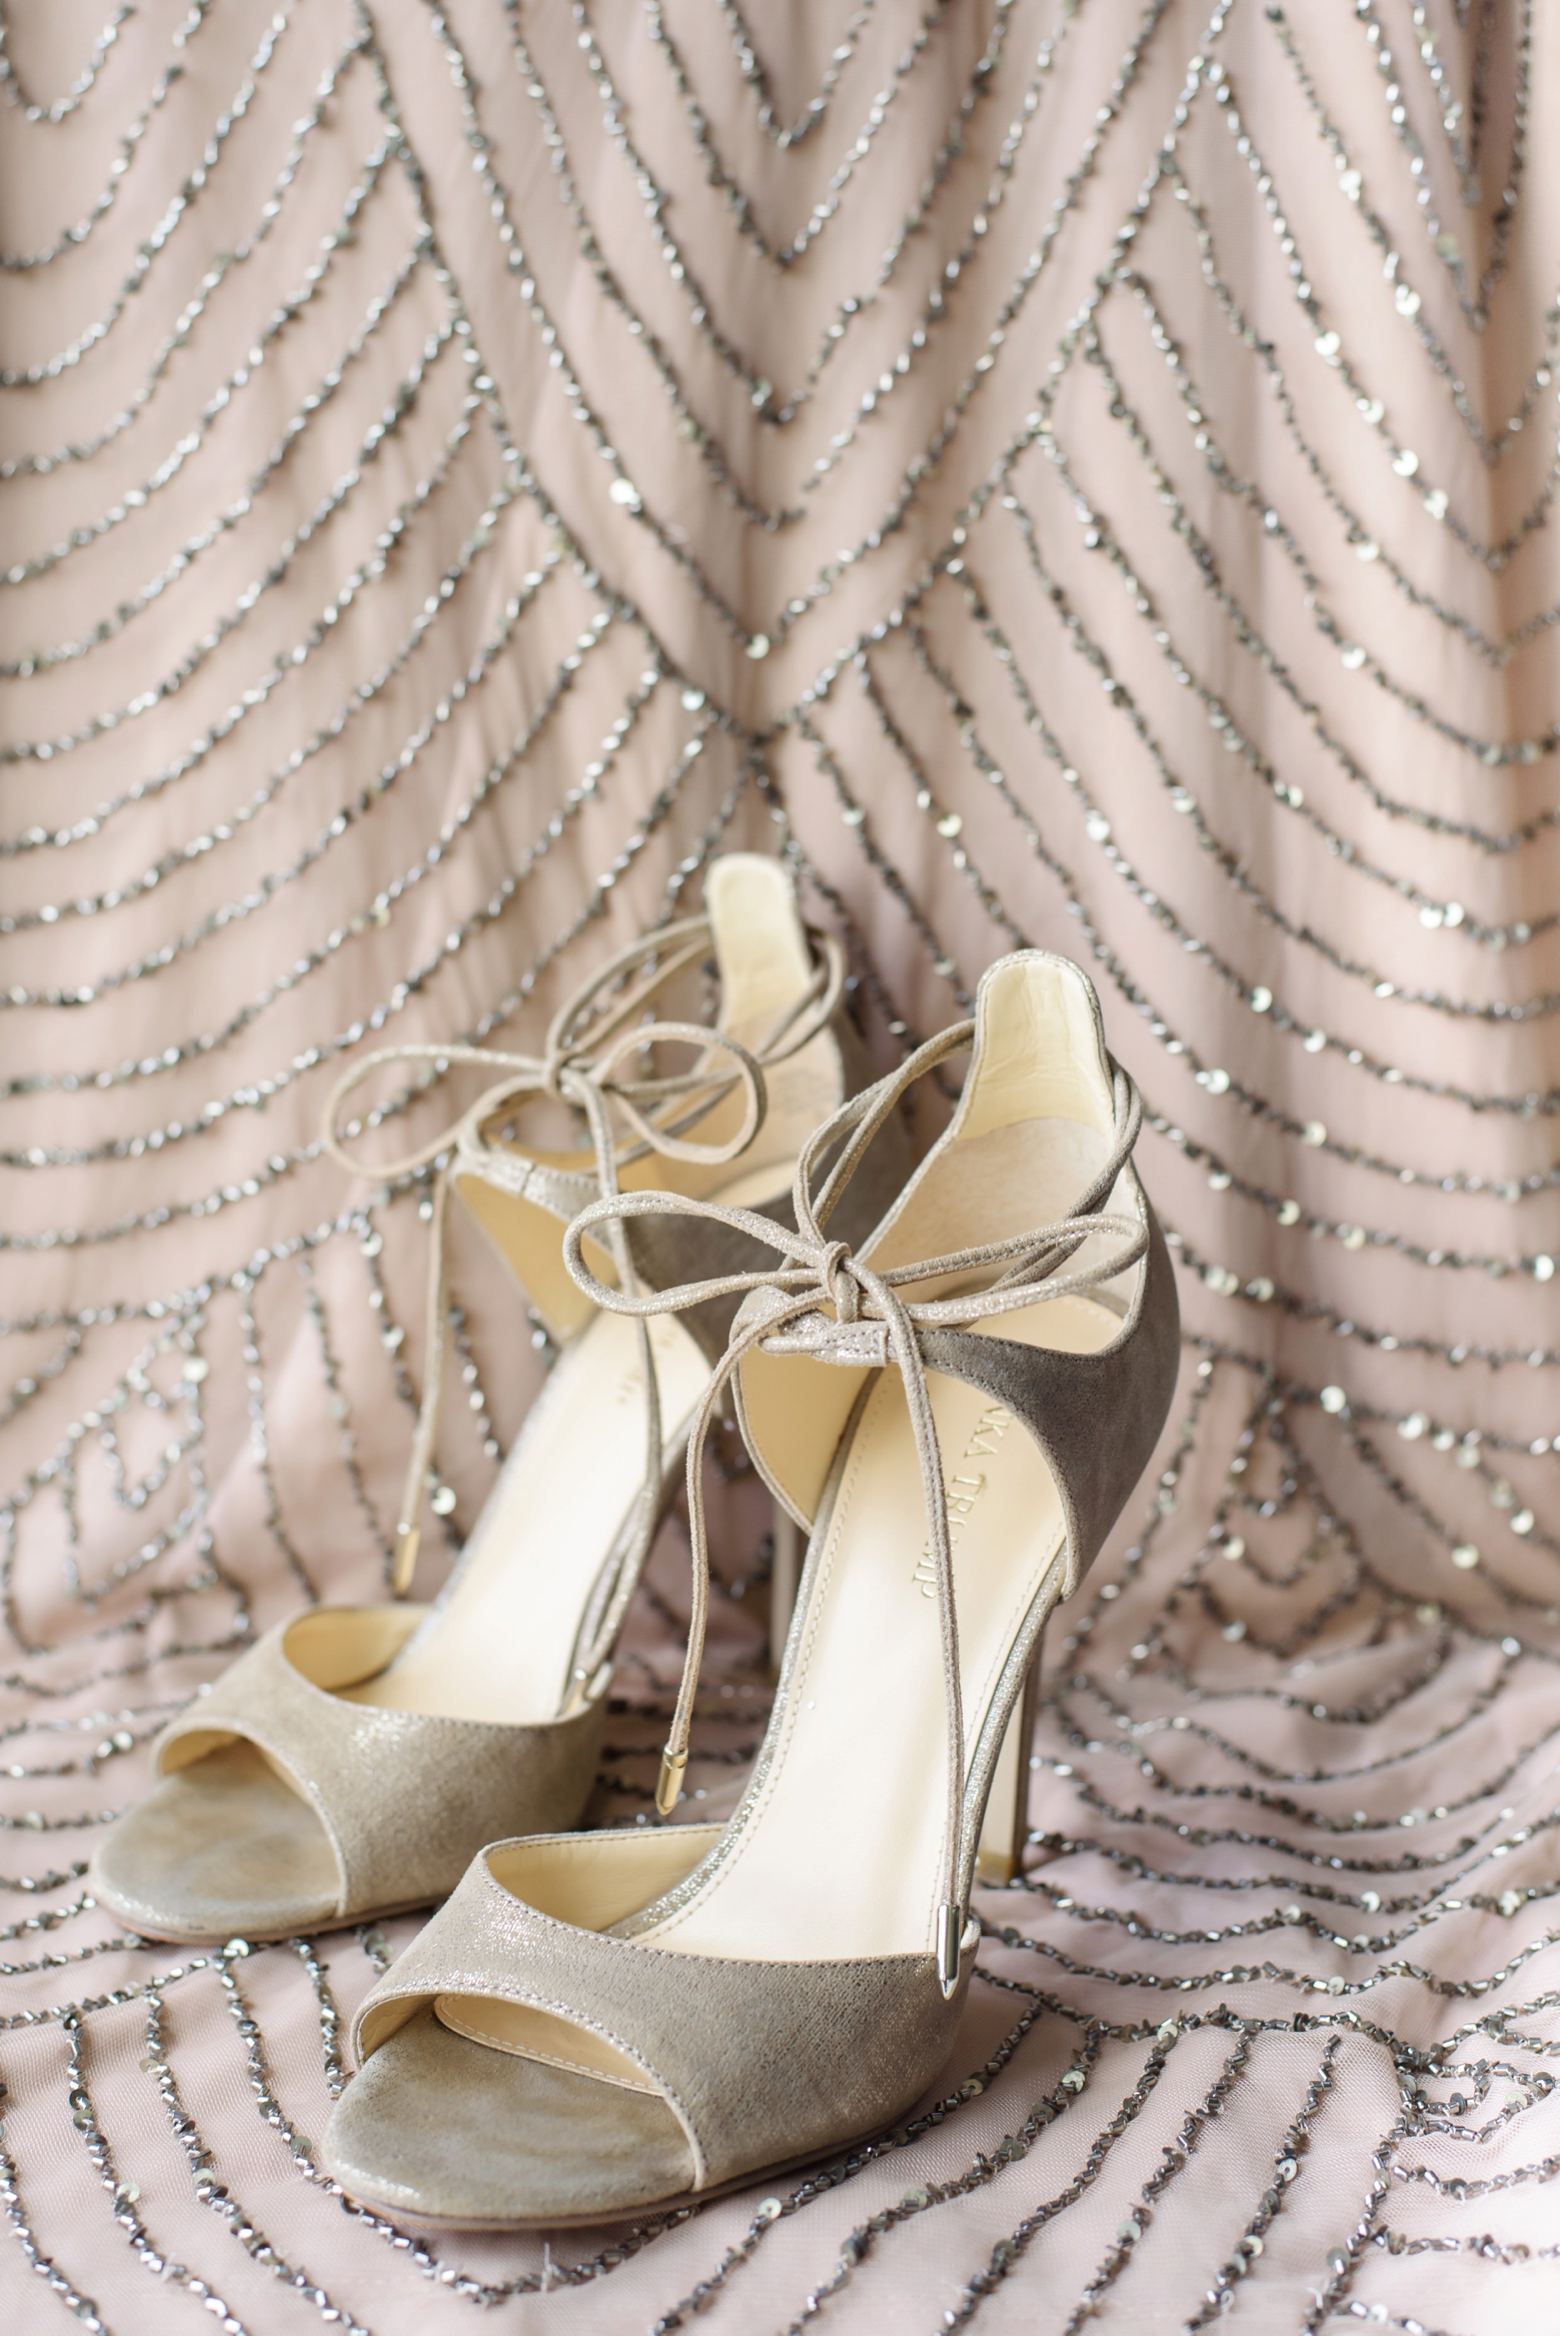 The Bride's shoes against an art deco designed dress by Sarah and Ben Photography